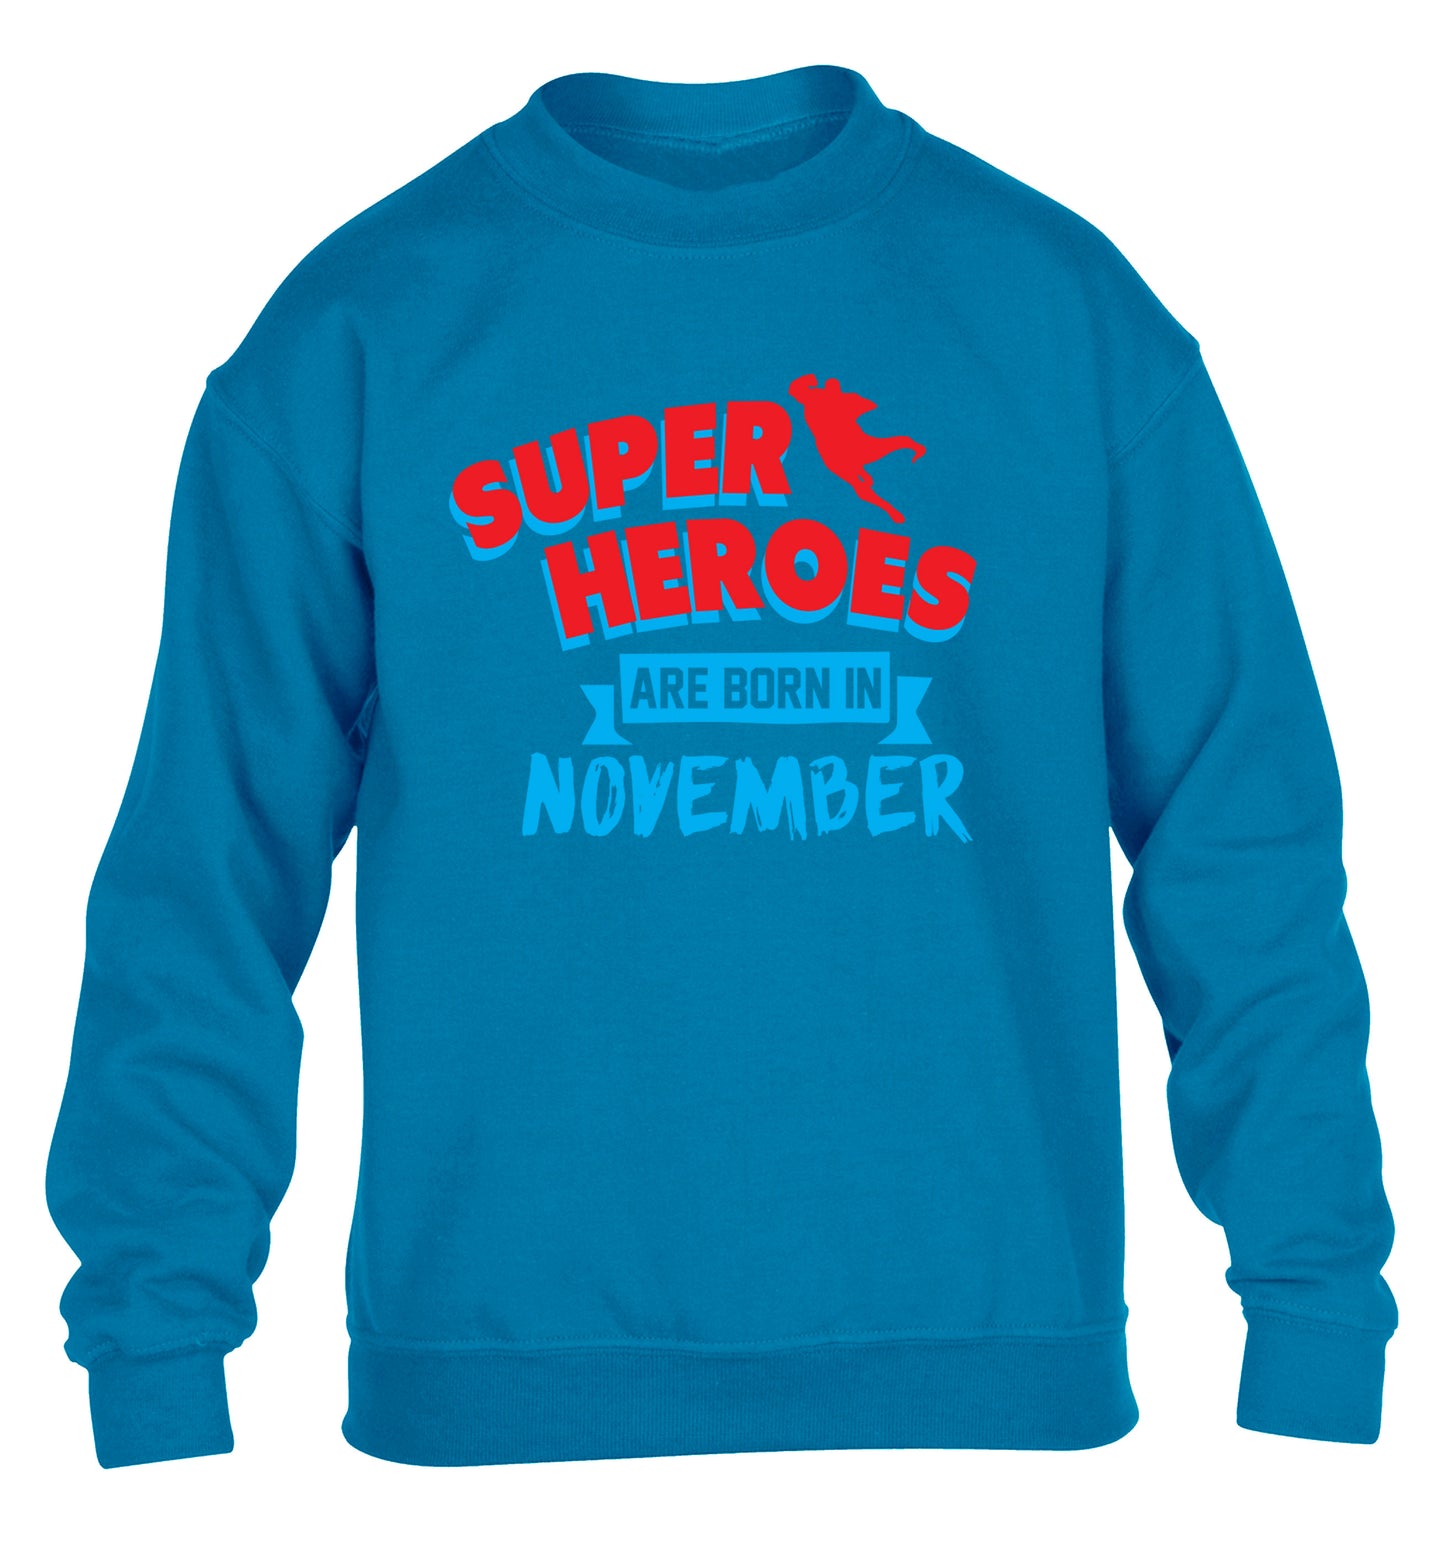 Superheroes are born in November children's blue sweater 12-13 Years